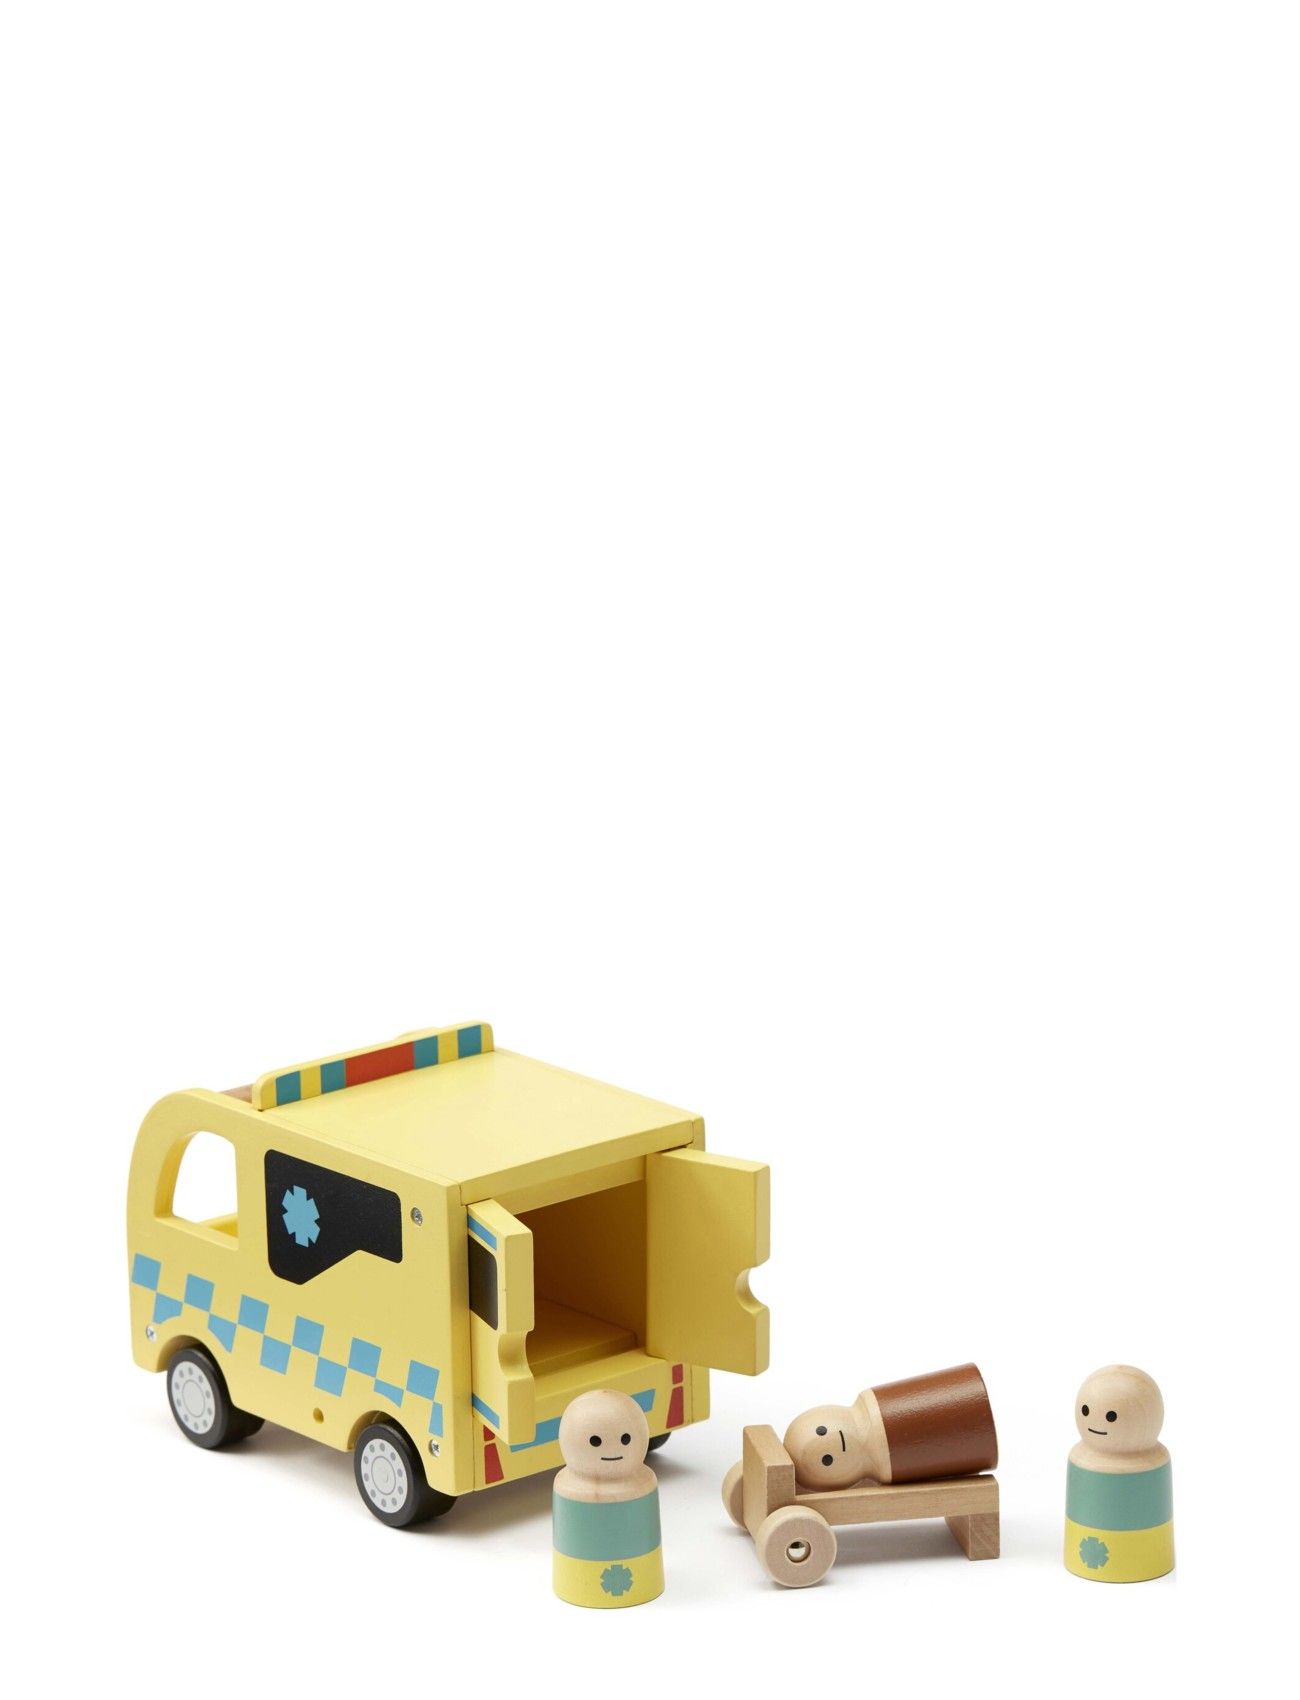 "Kid's Concept" "Ambulance Aiden Toys Playsets & Action Figures Wooden Yellow Kid's